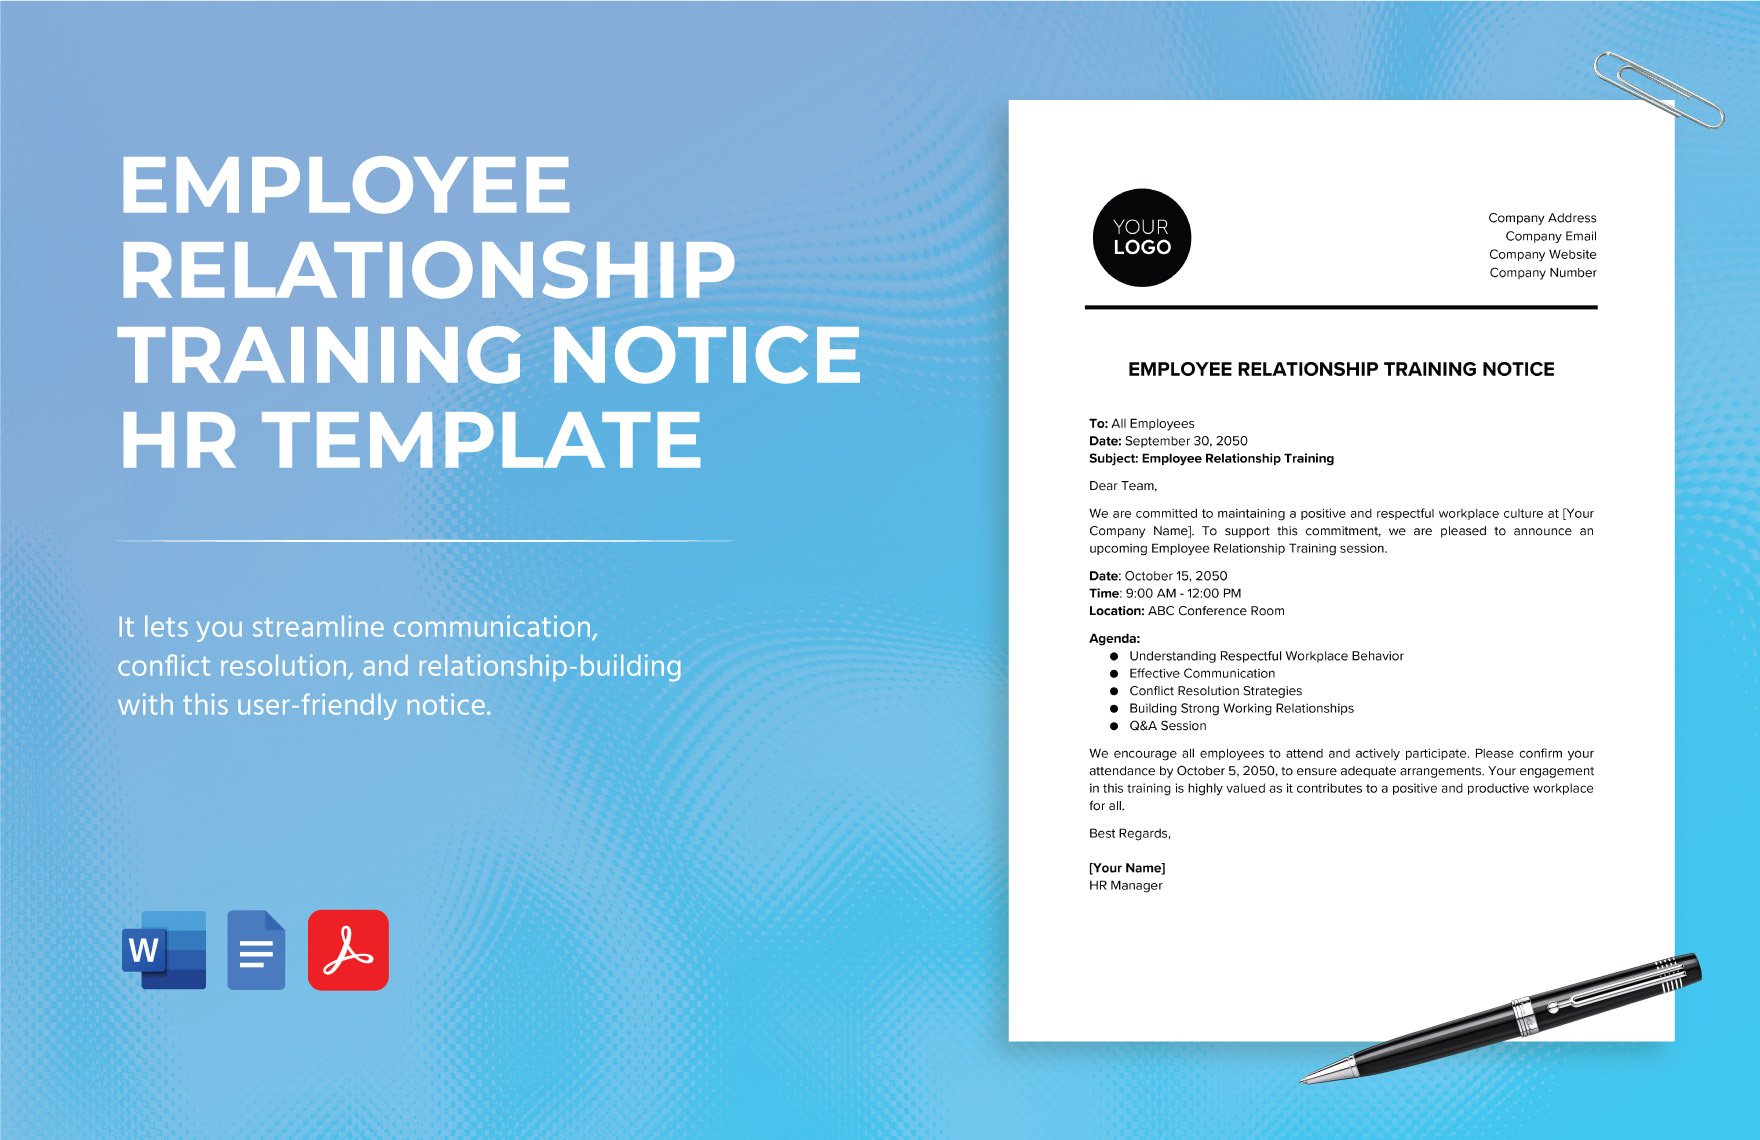 Employee Relationship Training Notice HR Template in Word, Google Docs, PDF